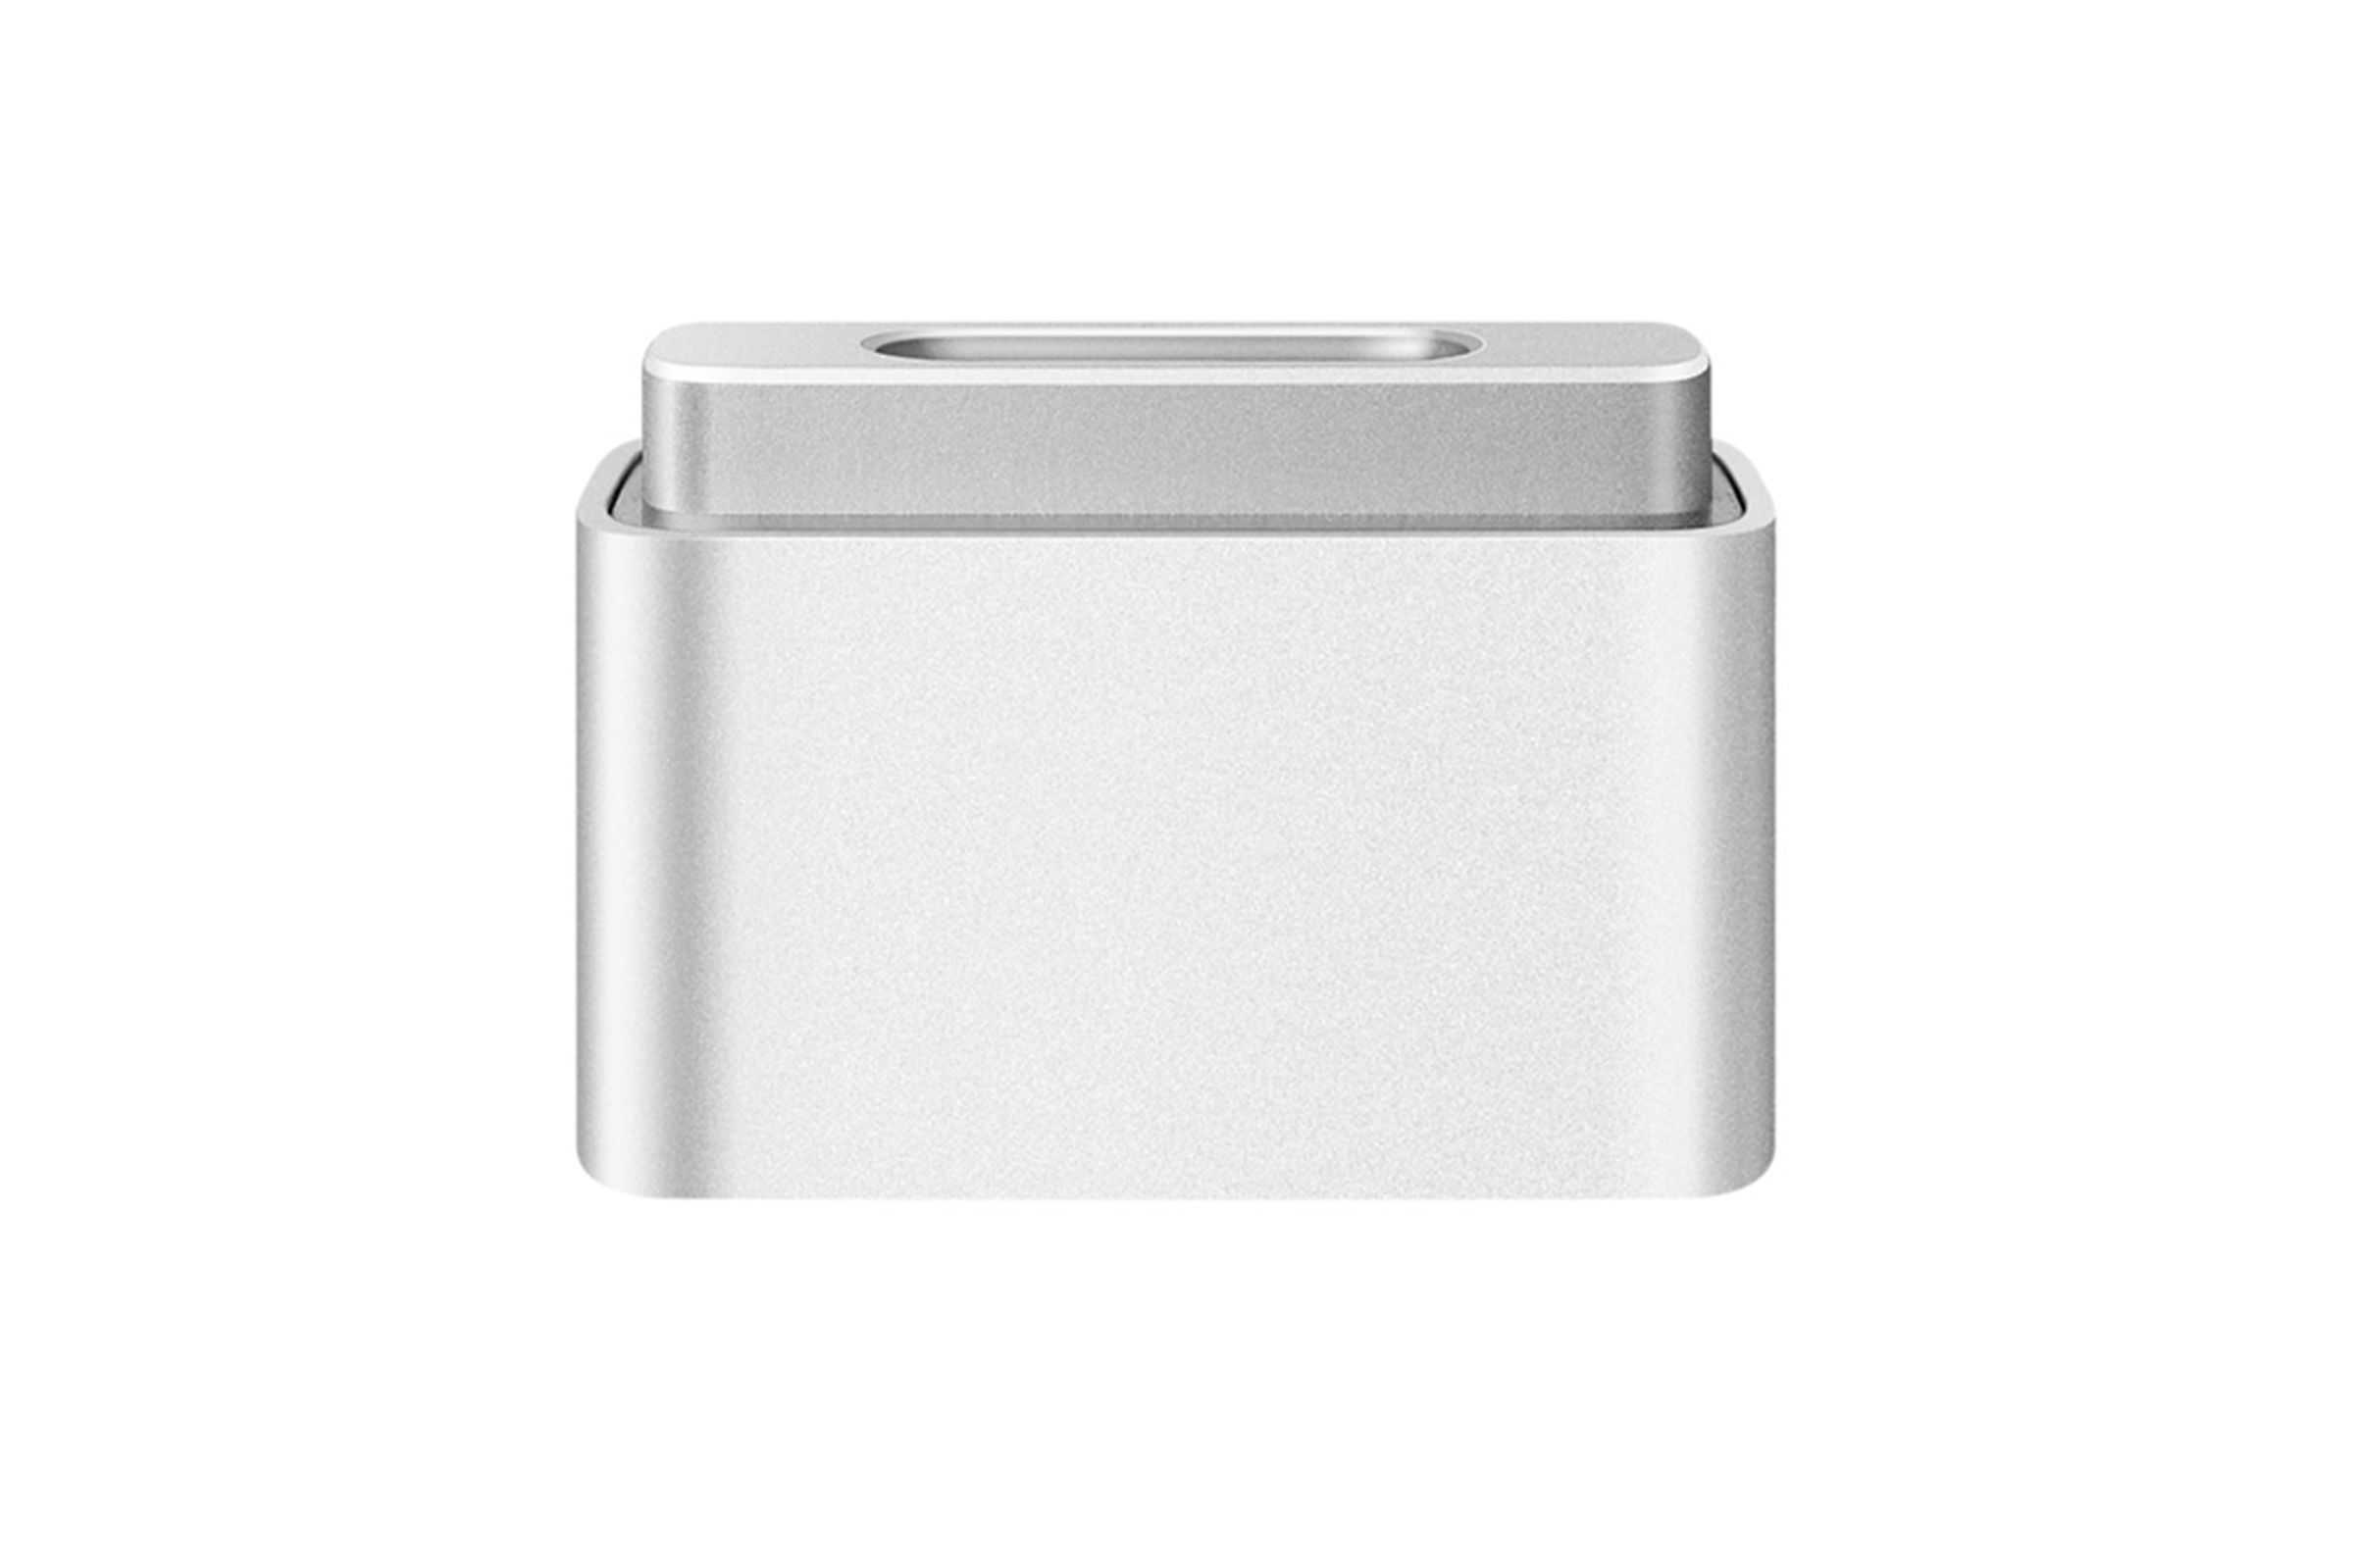 MagSafe 2 power connector press pictures